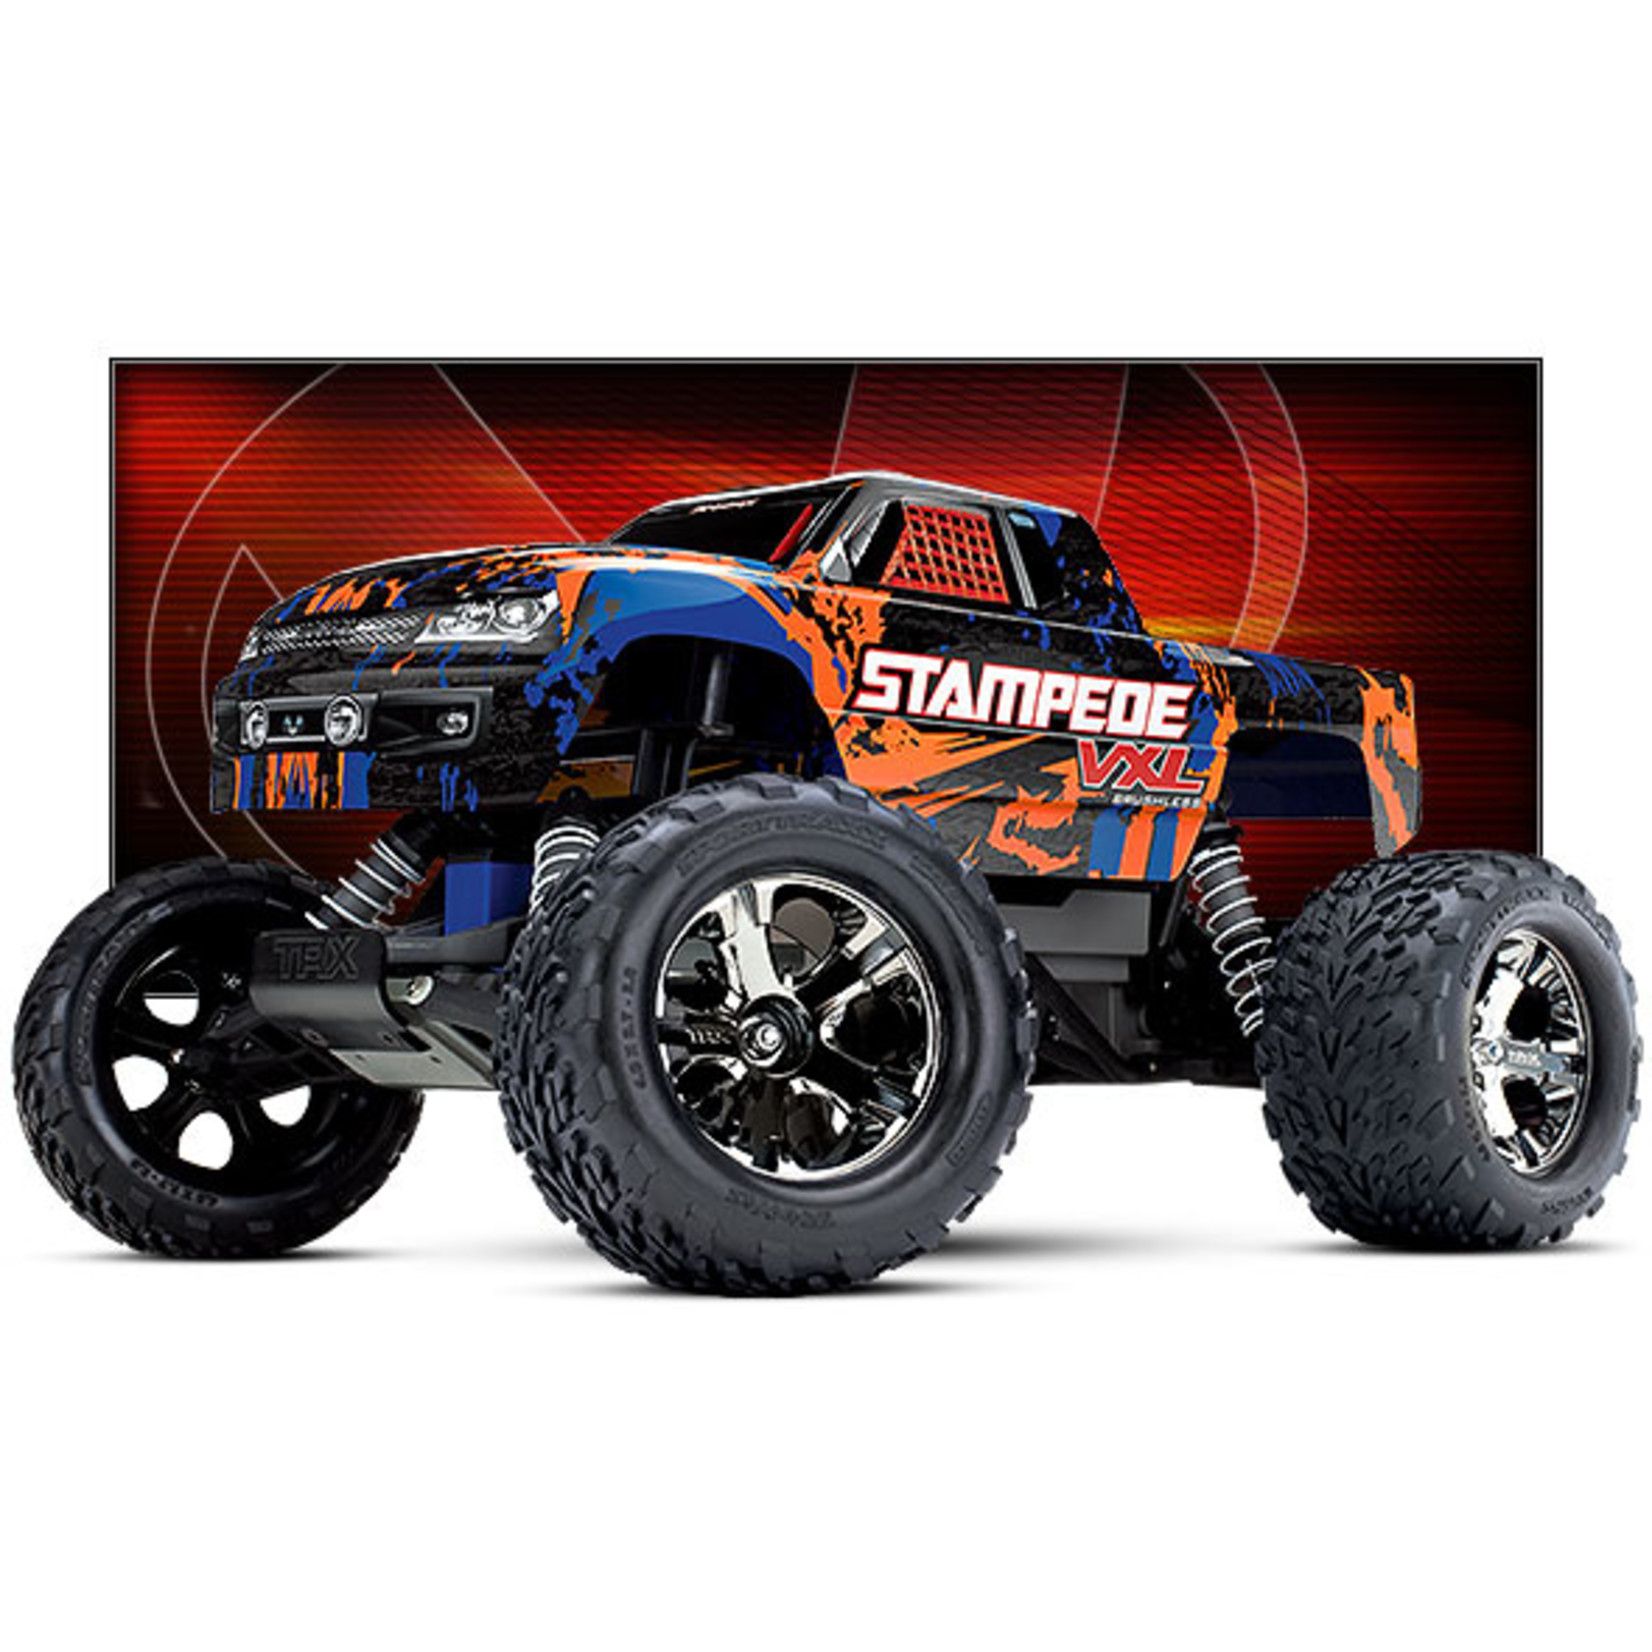 Traxxas 36076-4-ORNG Stampede® VXL:  1/10 Scale Monster Truck with TQi™ Traxxas Link™ Enabled 2.4GHz Radio System & Traxxas Stability Management (TSM)®